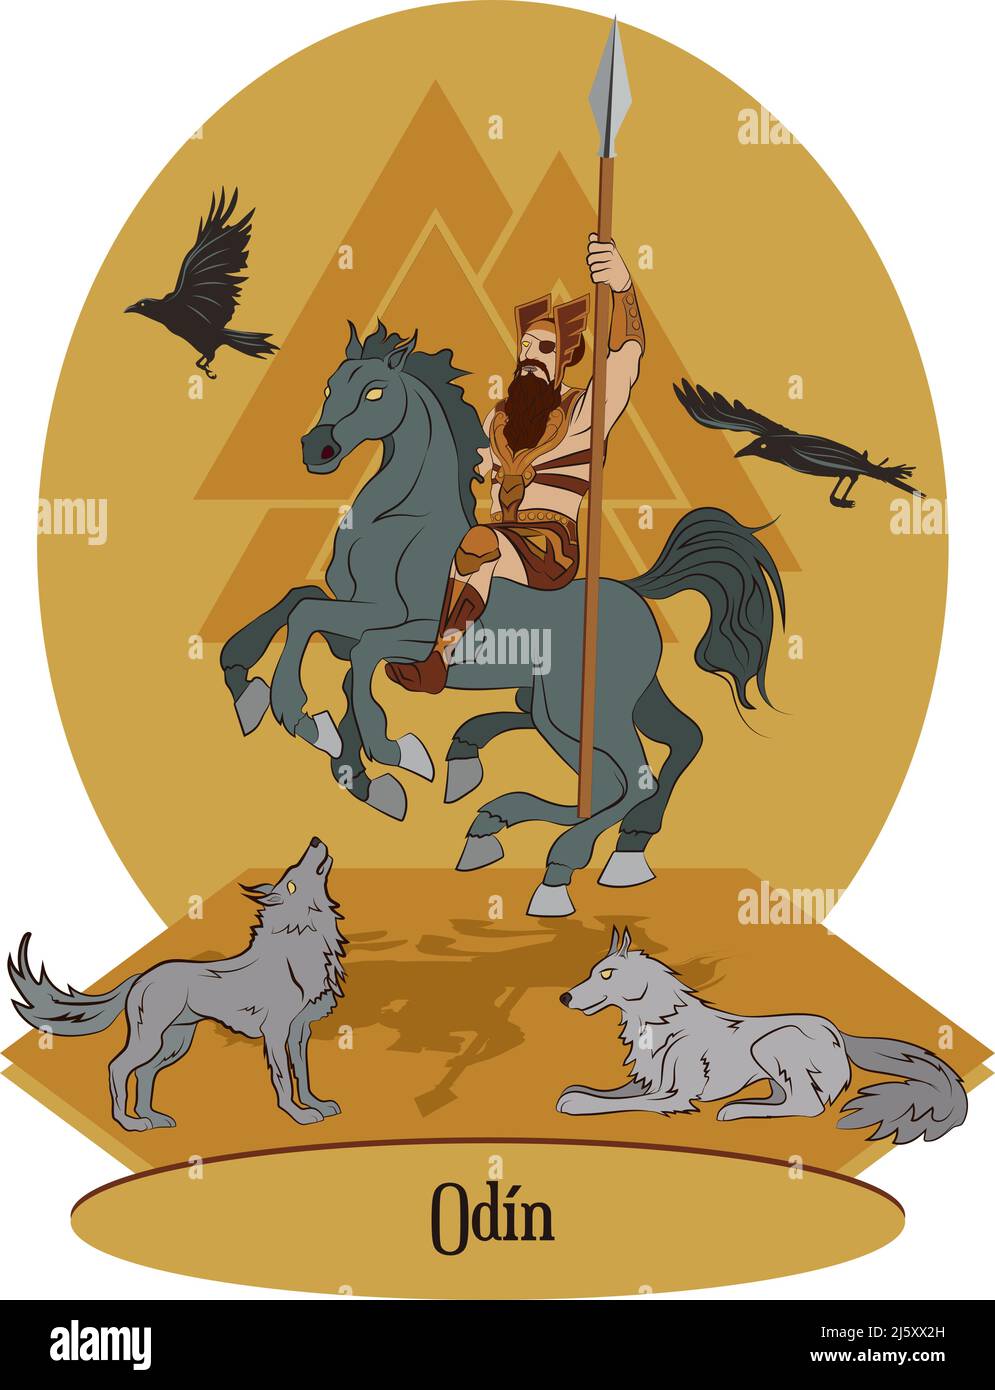 Illustration vector isolated of Norse or Scandinavian mythical god, Odin Stock Vector